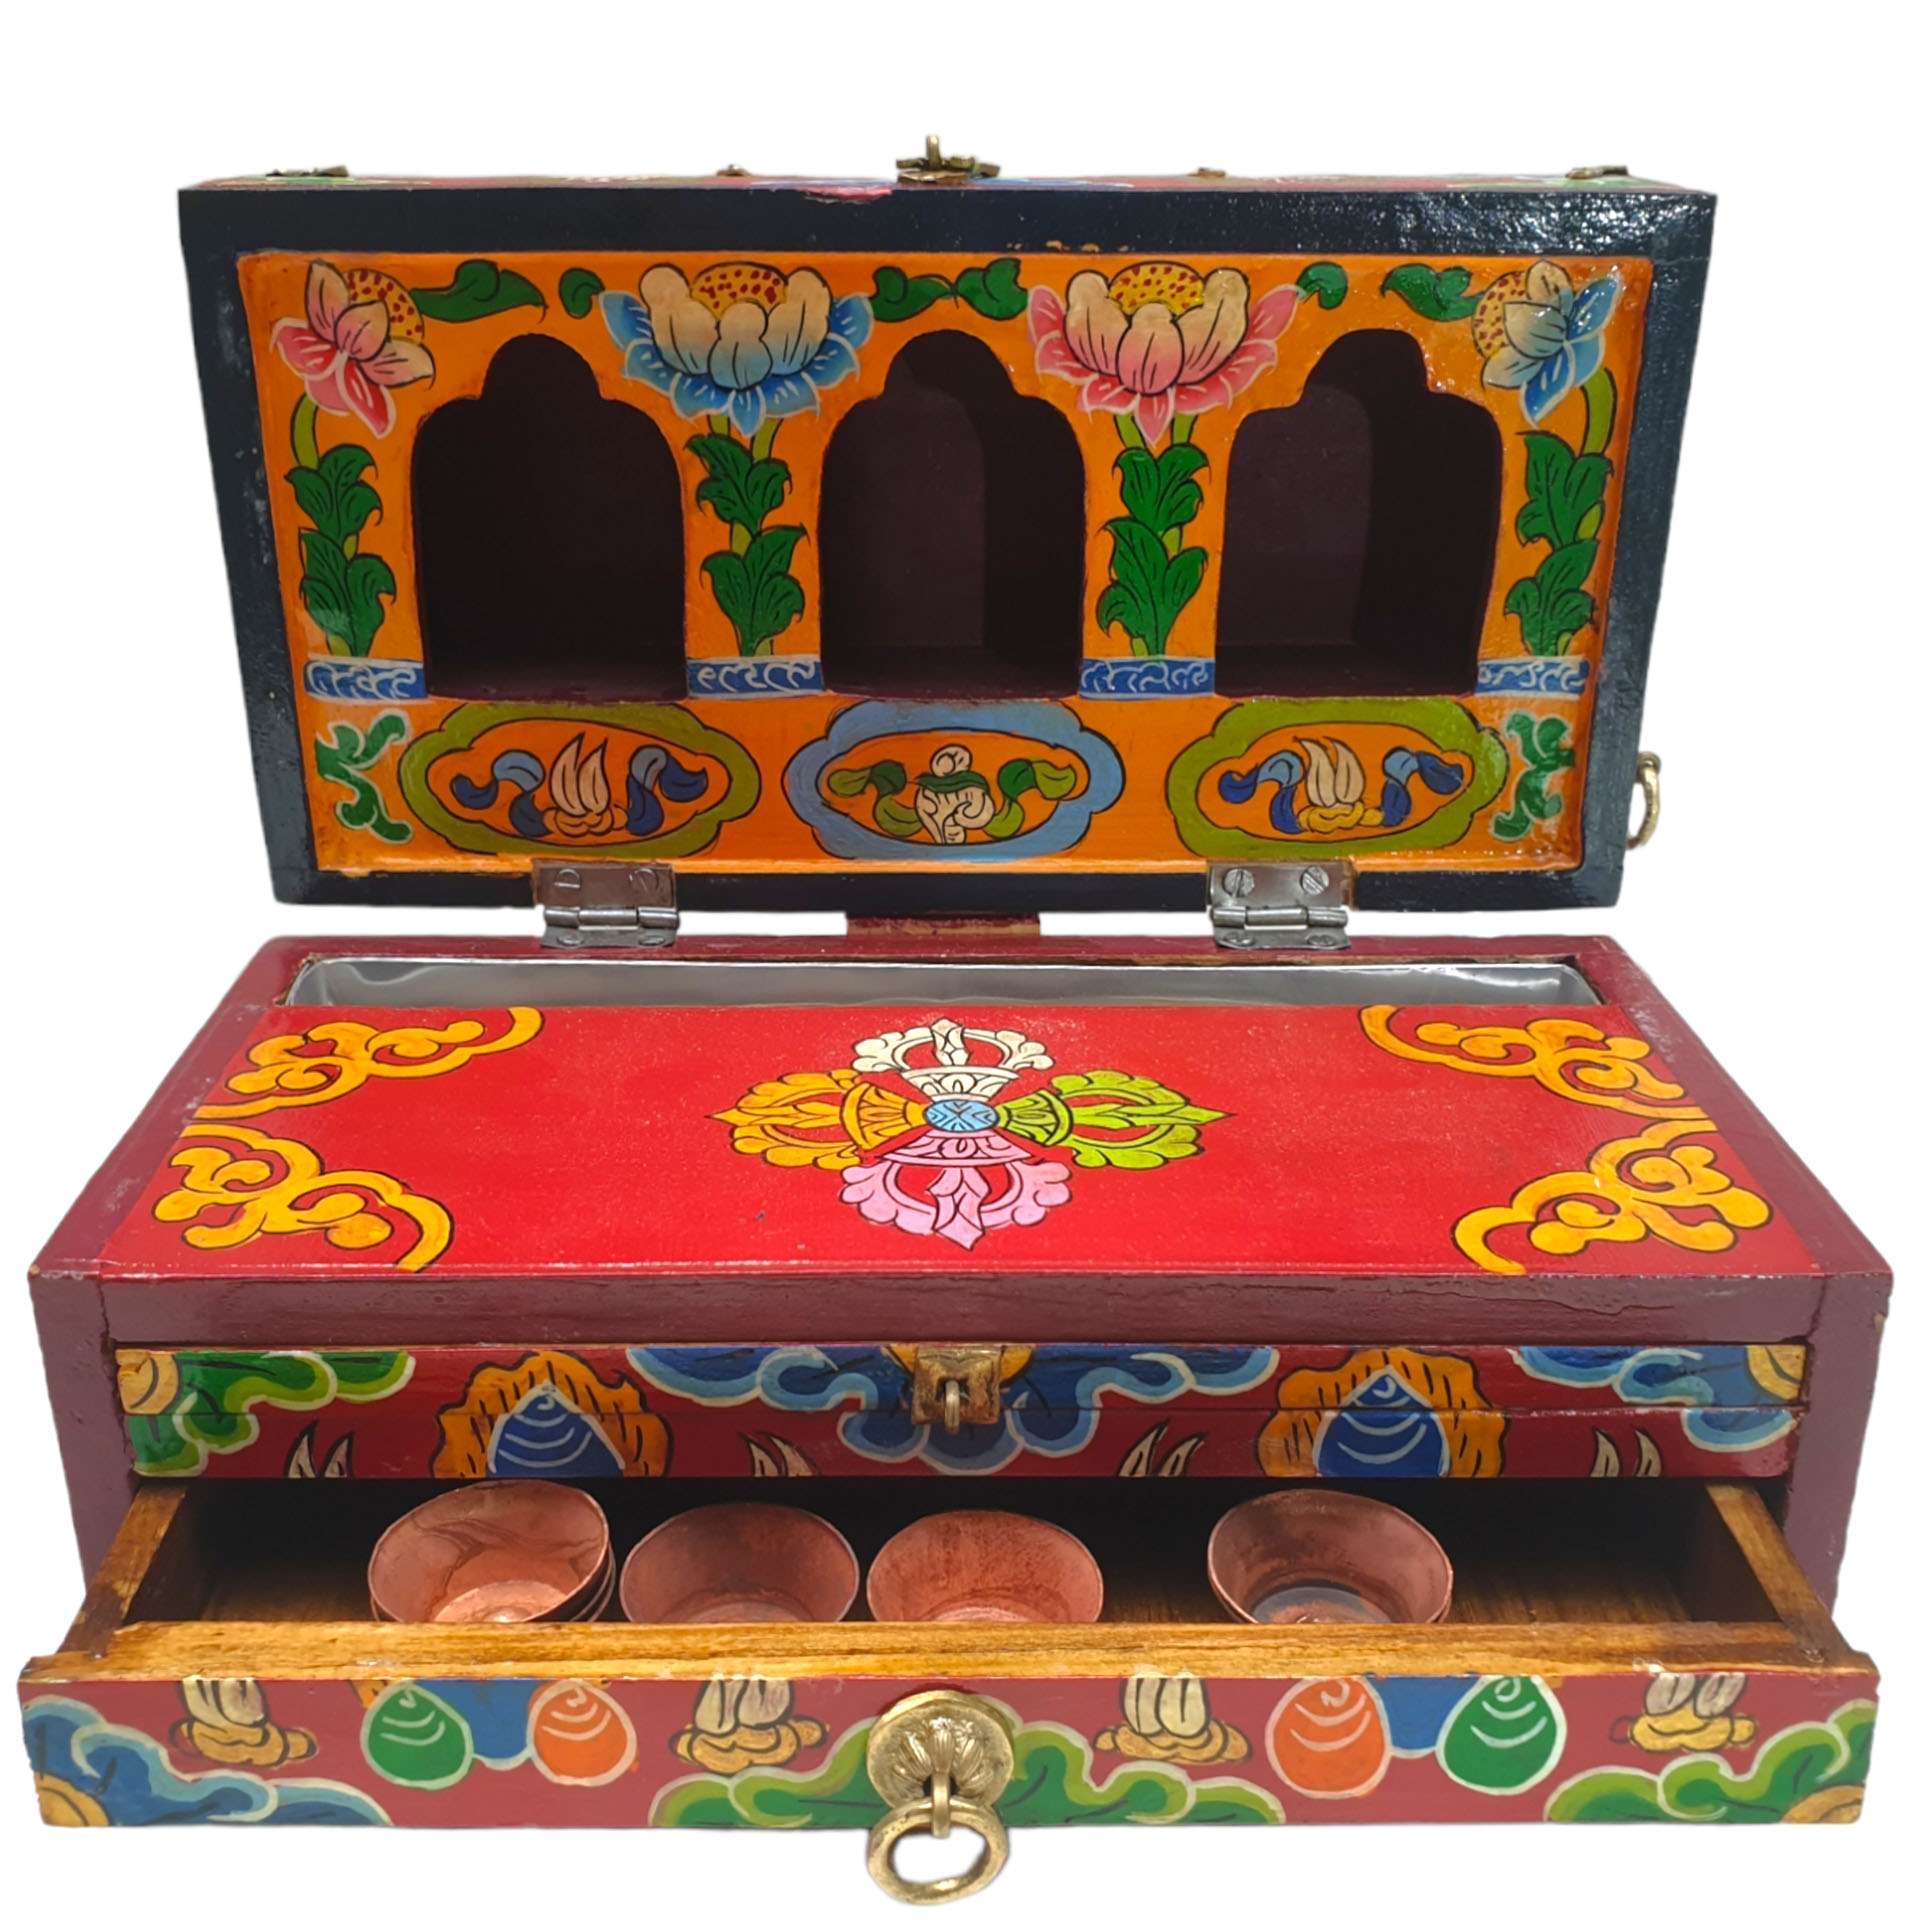 Buddhist Handmade Wooden Traveling Altar Box, foldable, Double Dorje Design, Traditional Color Painted